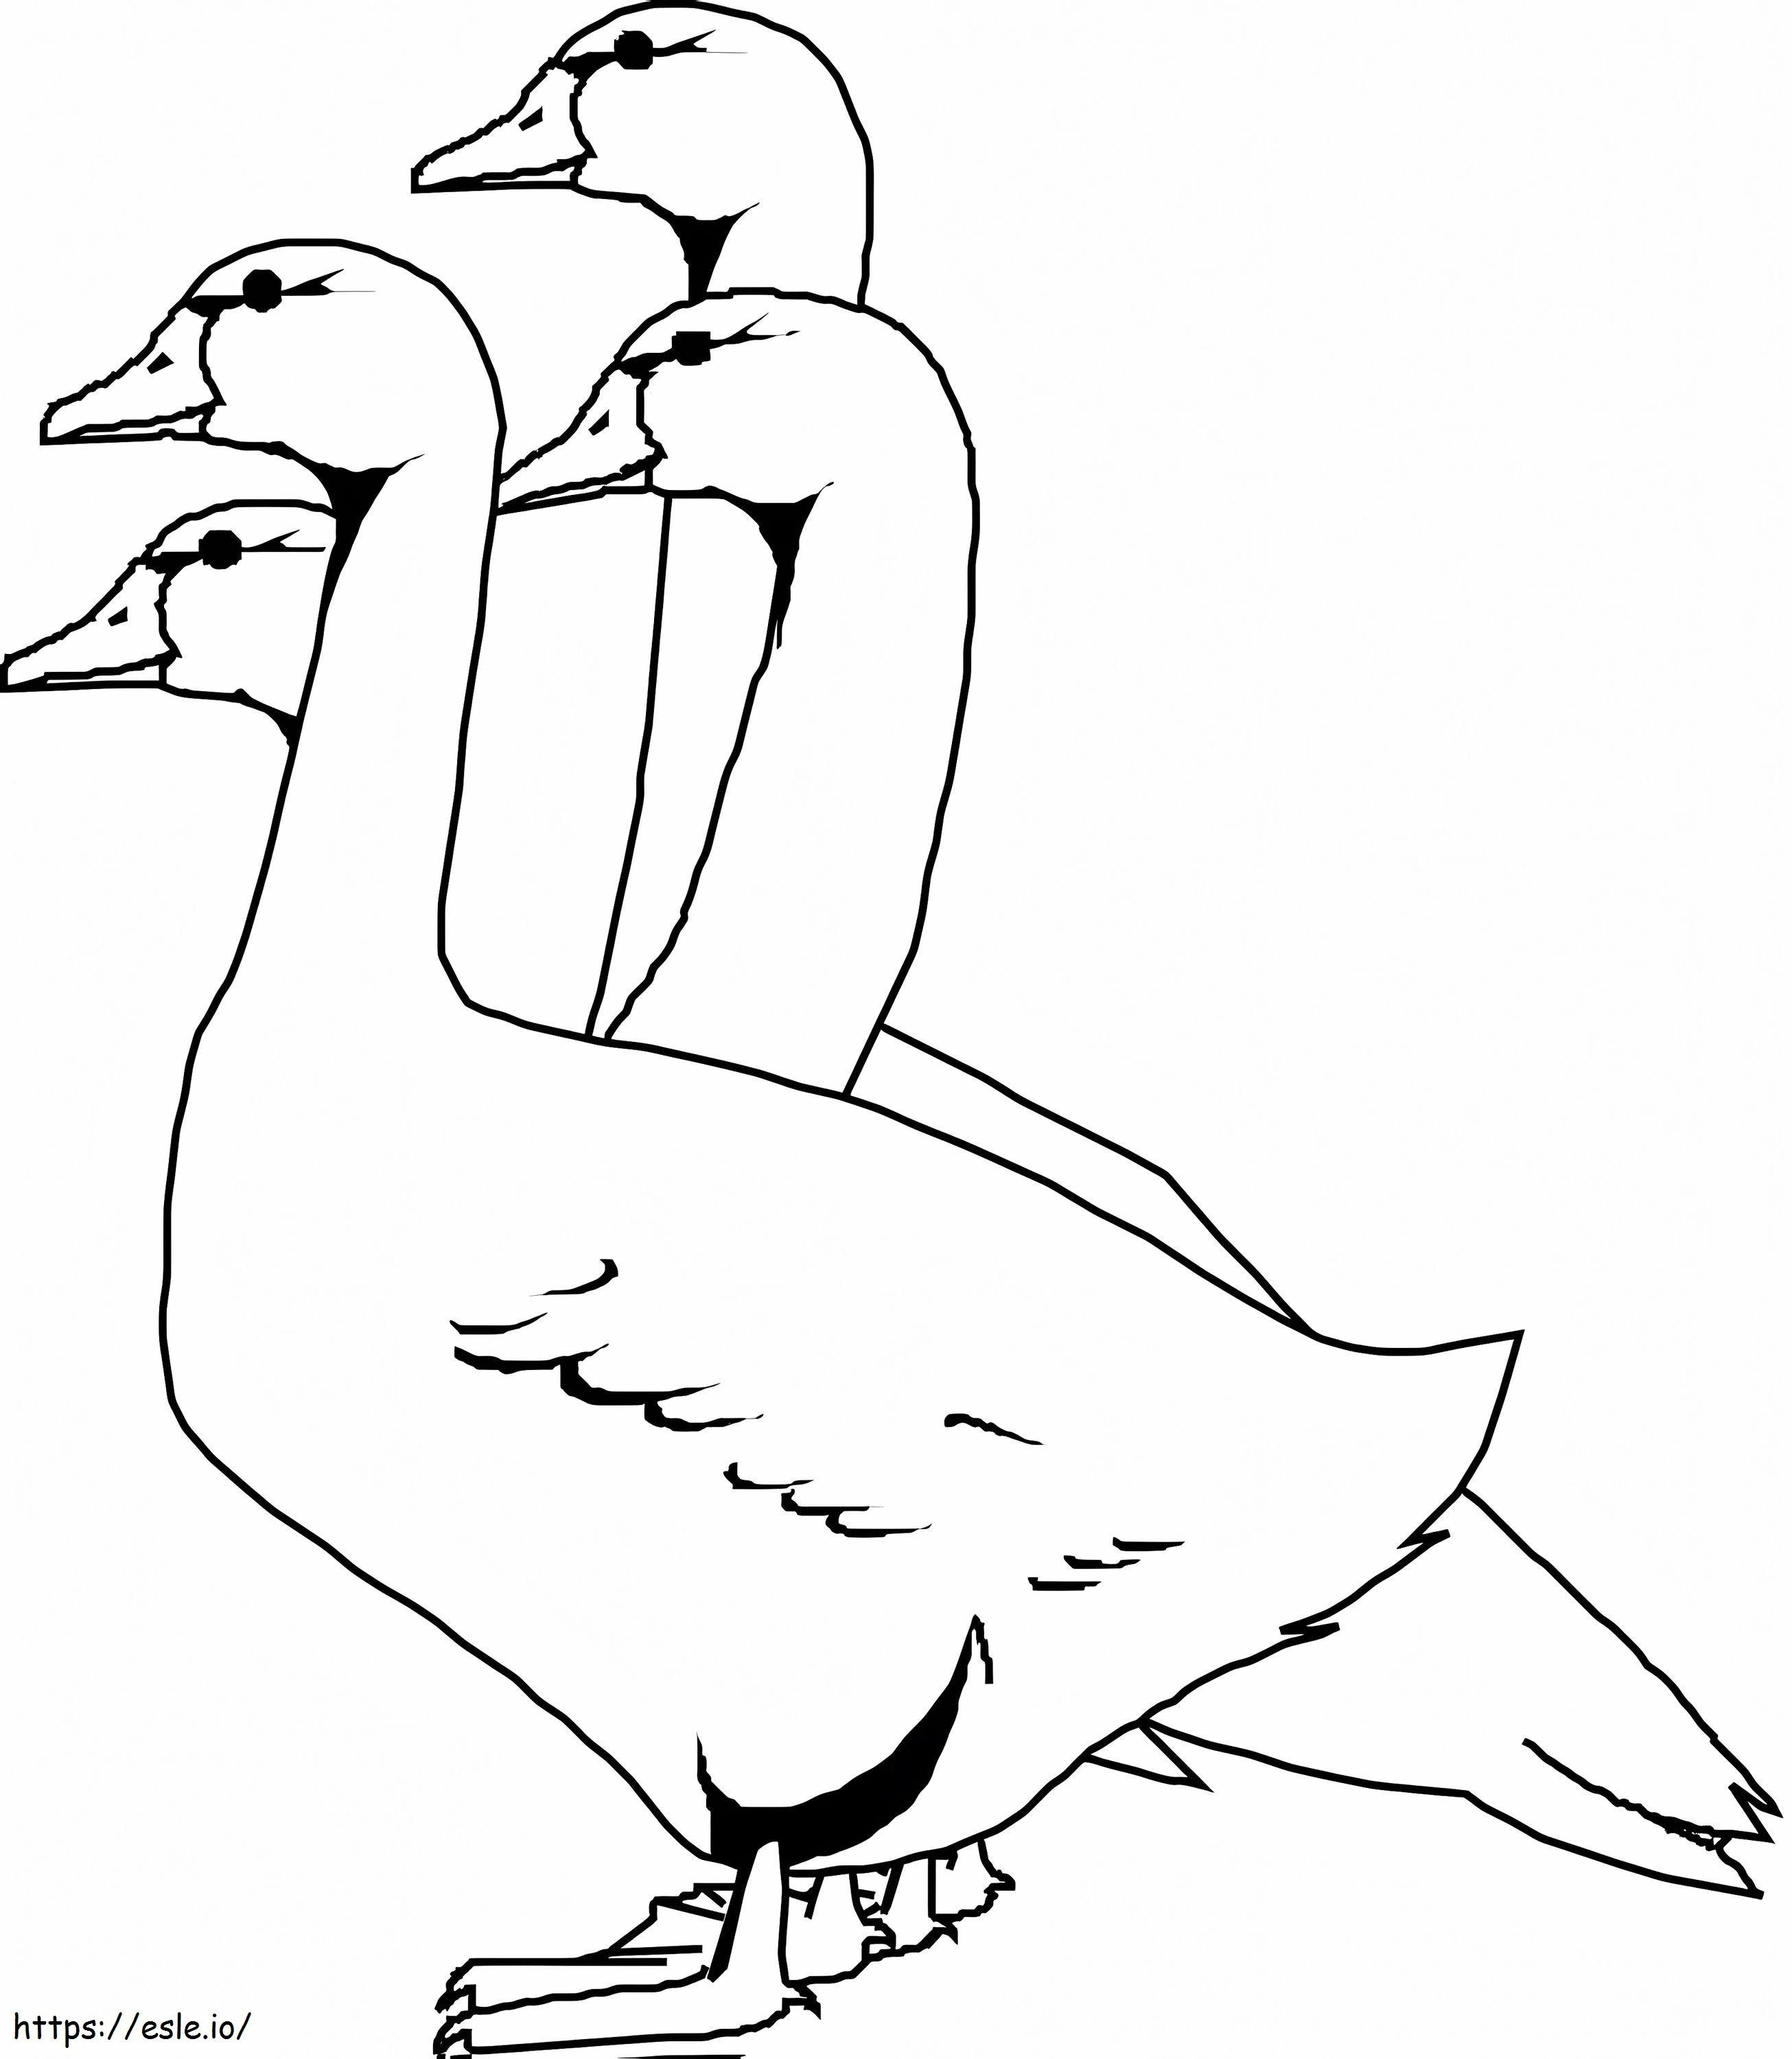 Four Geese coloring page